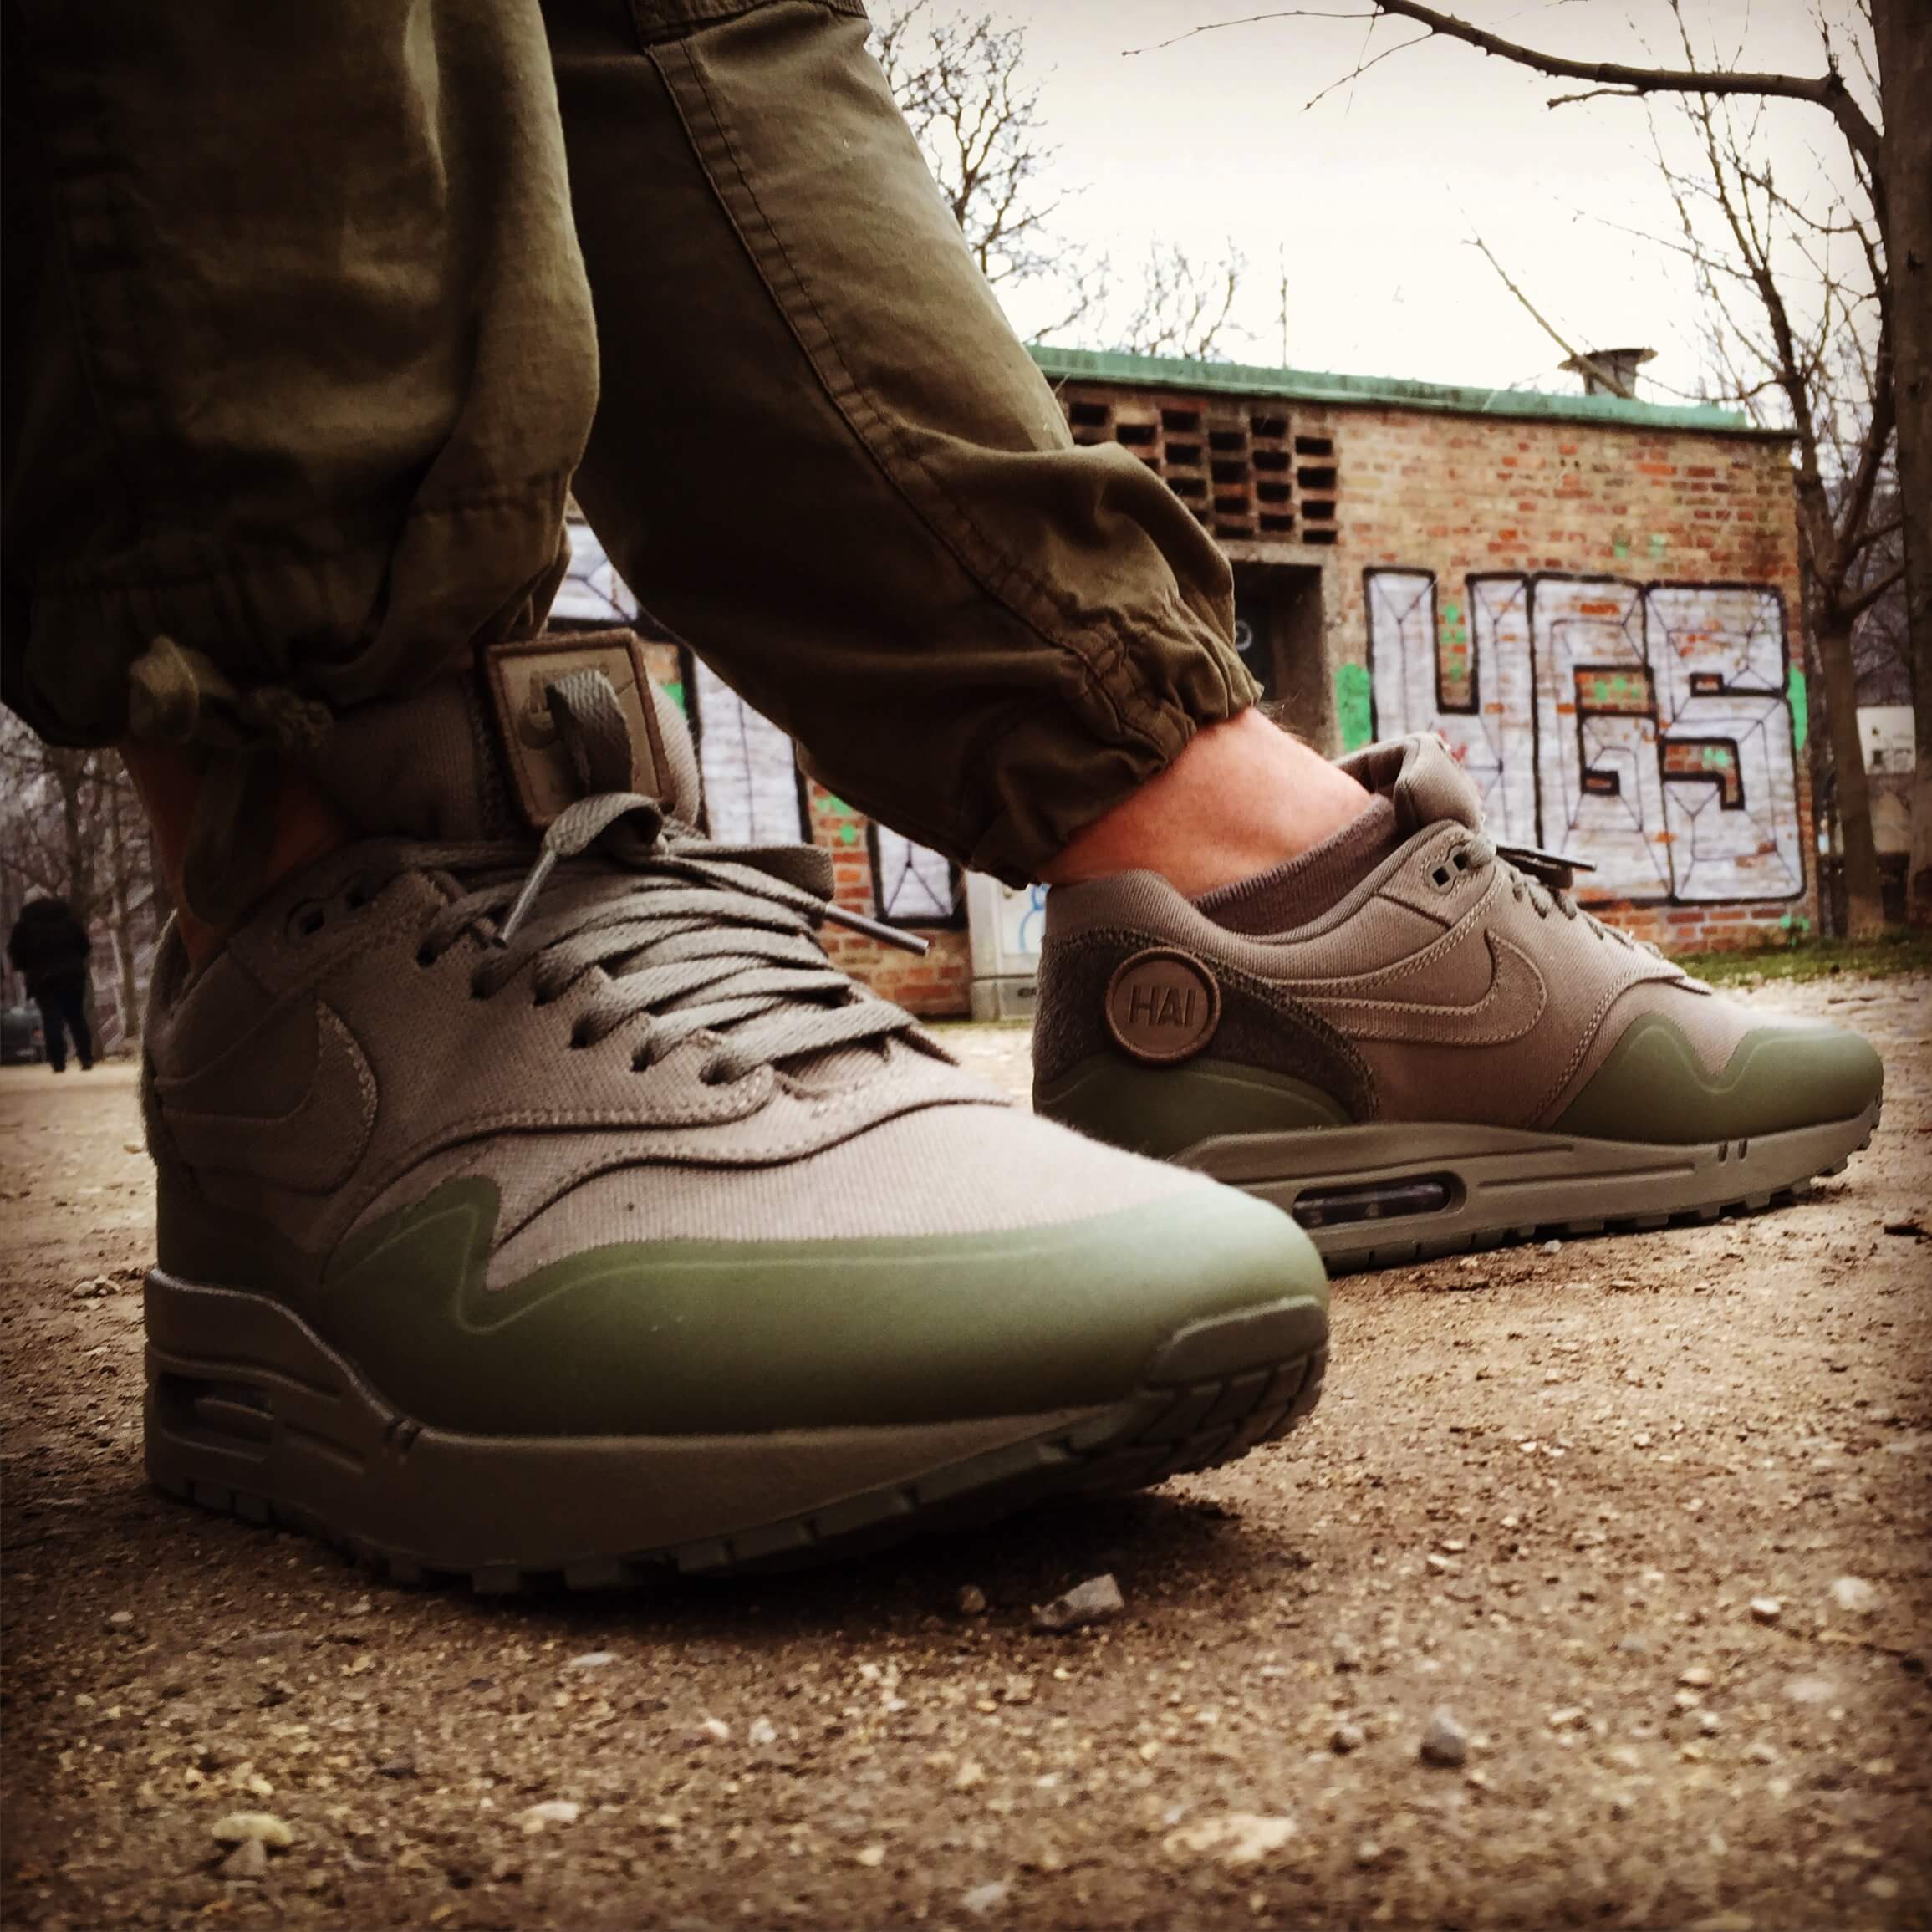 Nike-Air-Max-Patch-Pack-Side-View-2-Benstah-Onfeet